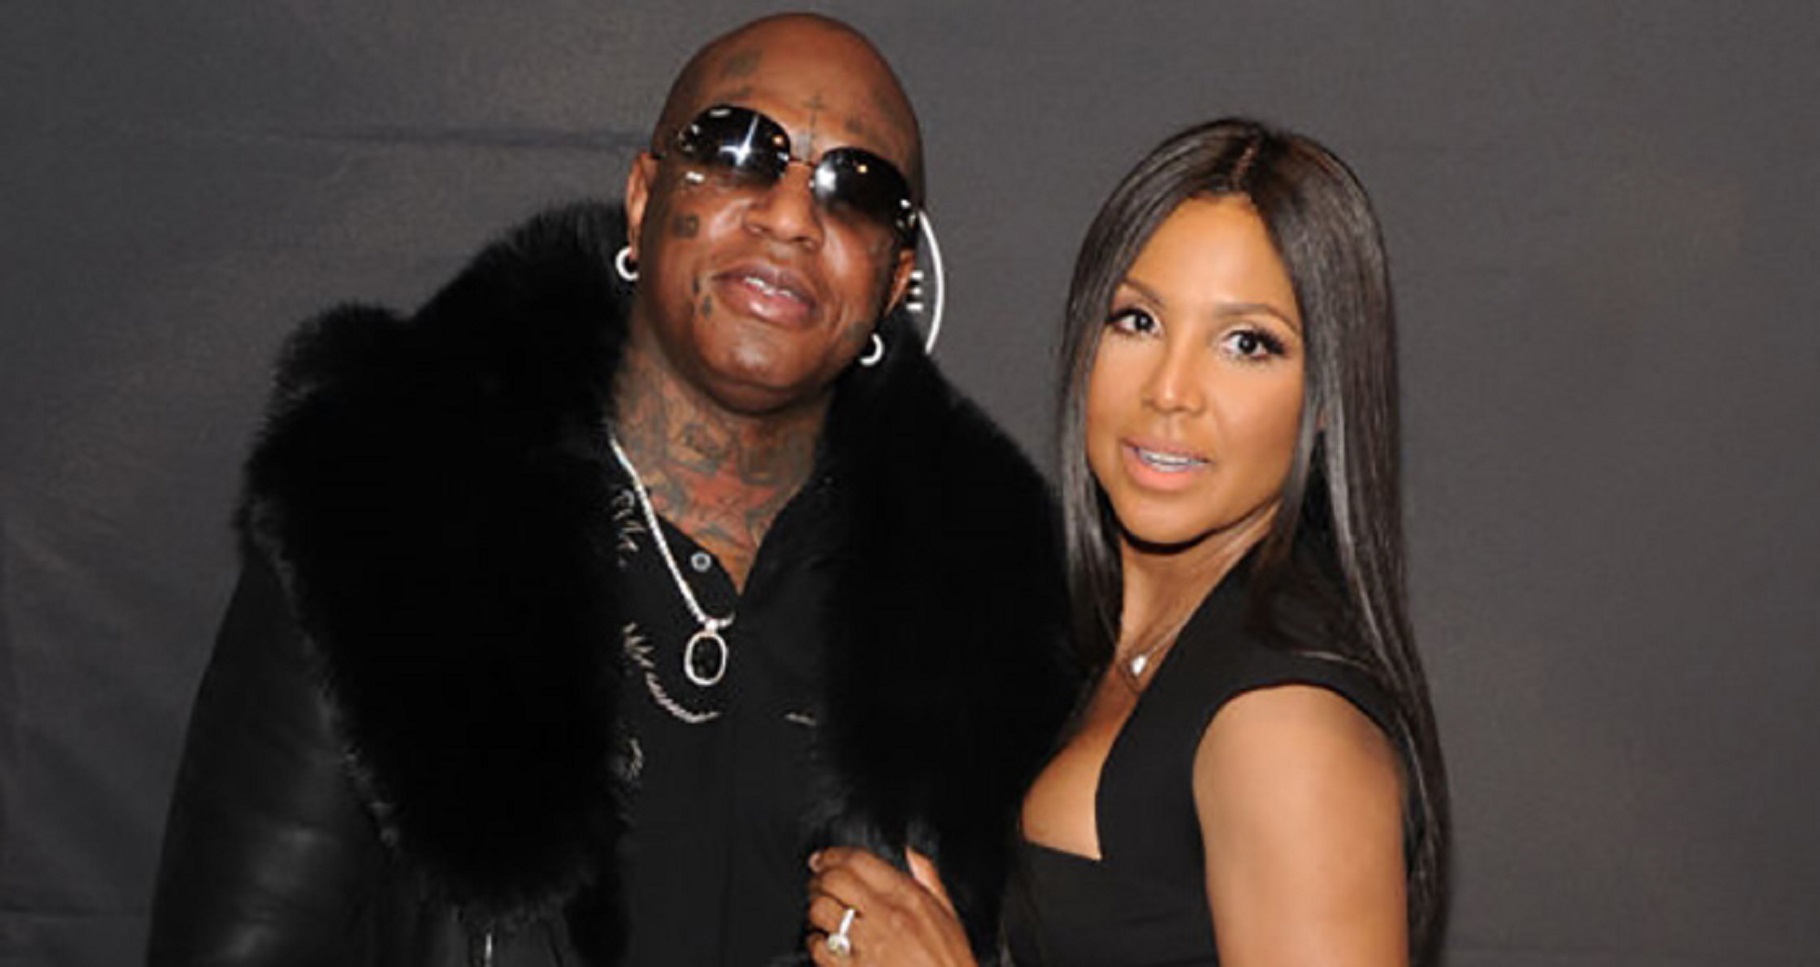 Toni Braxton Confirms Her Marriage With Birdman Happening ‘This Year’